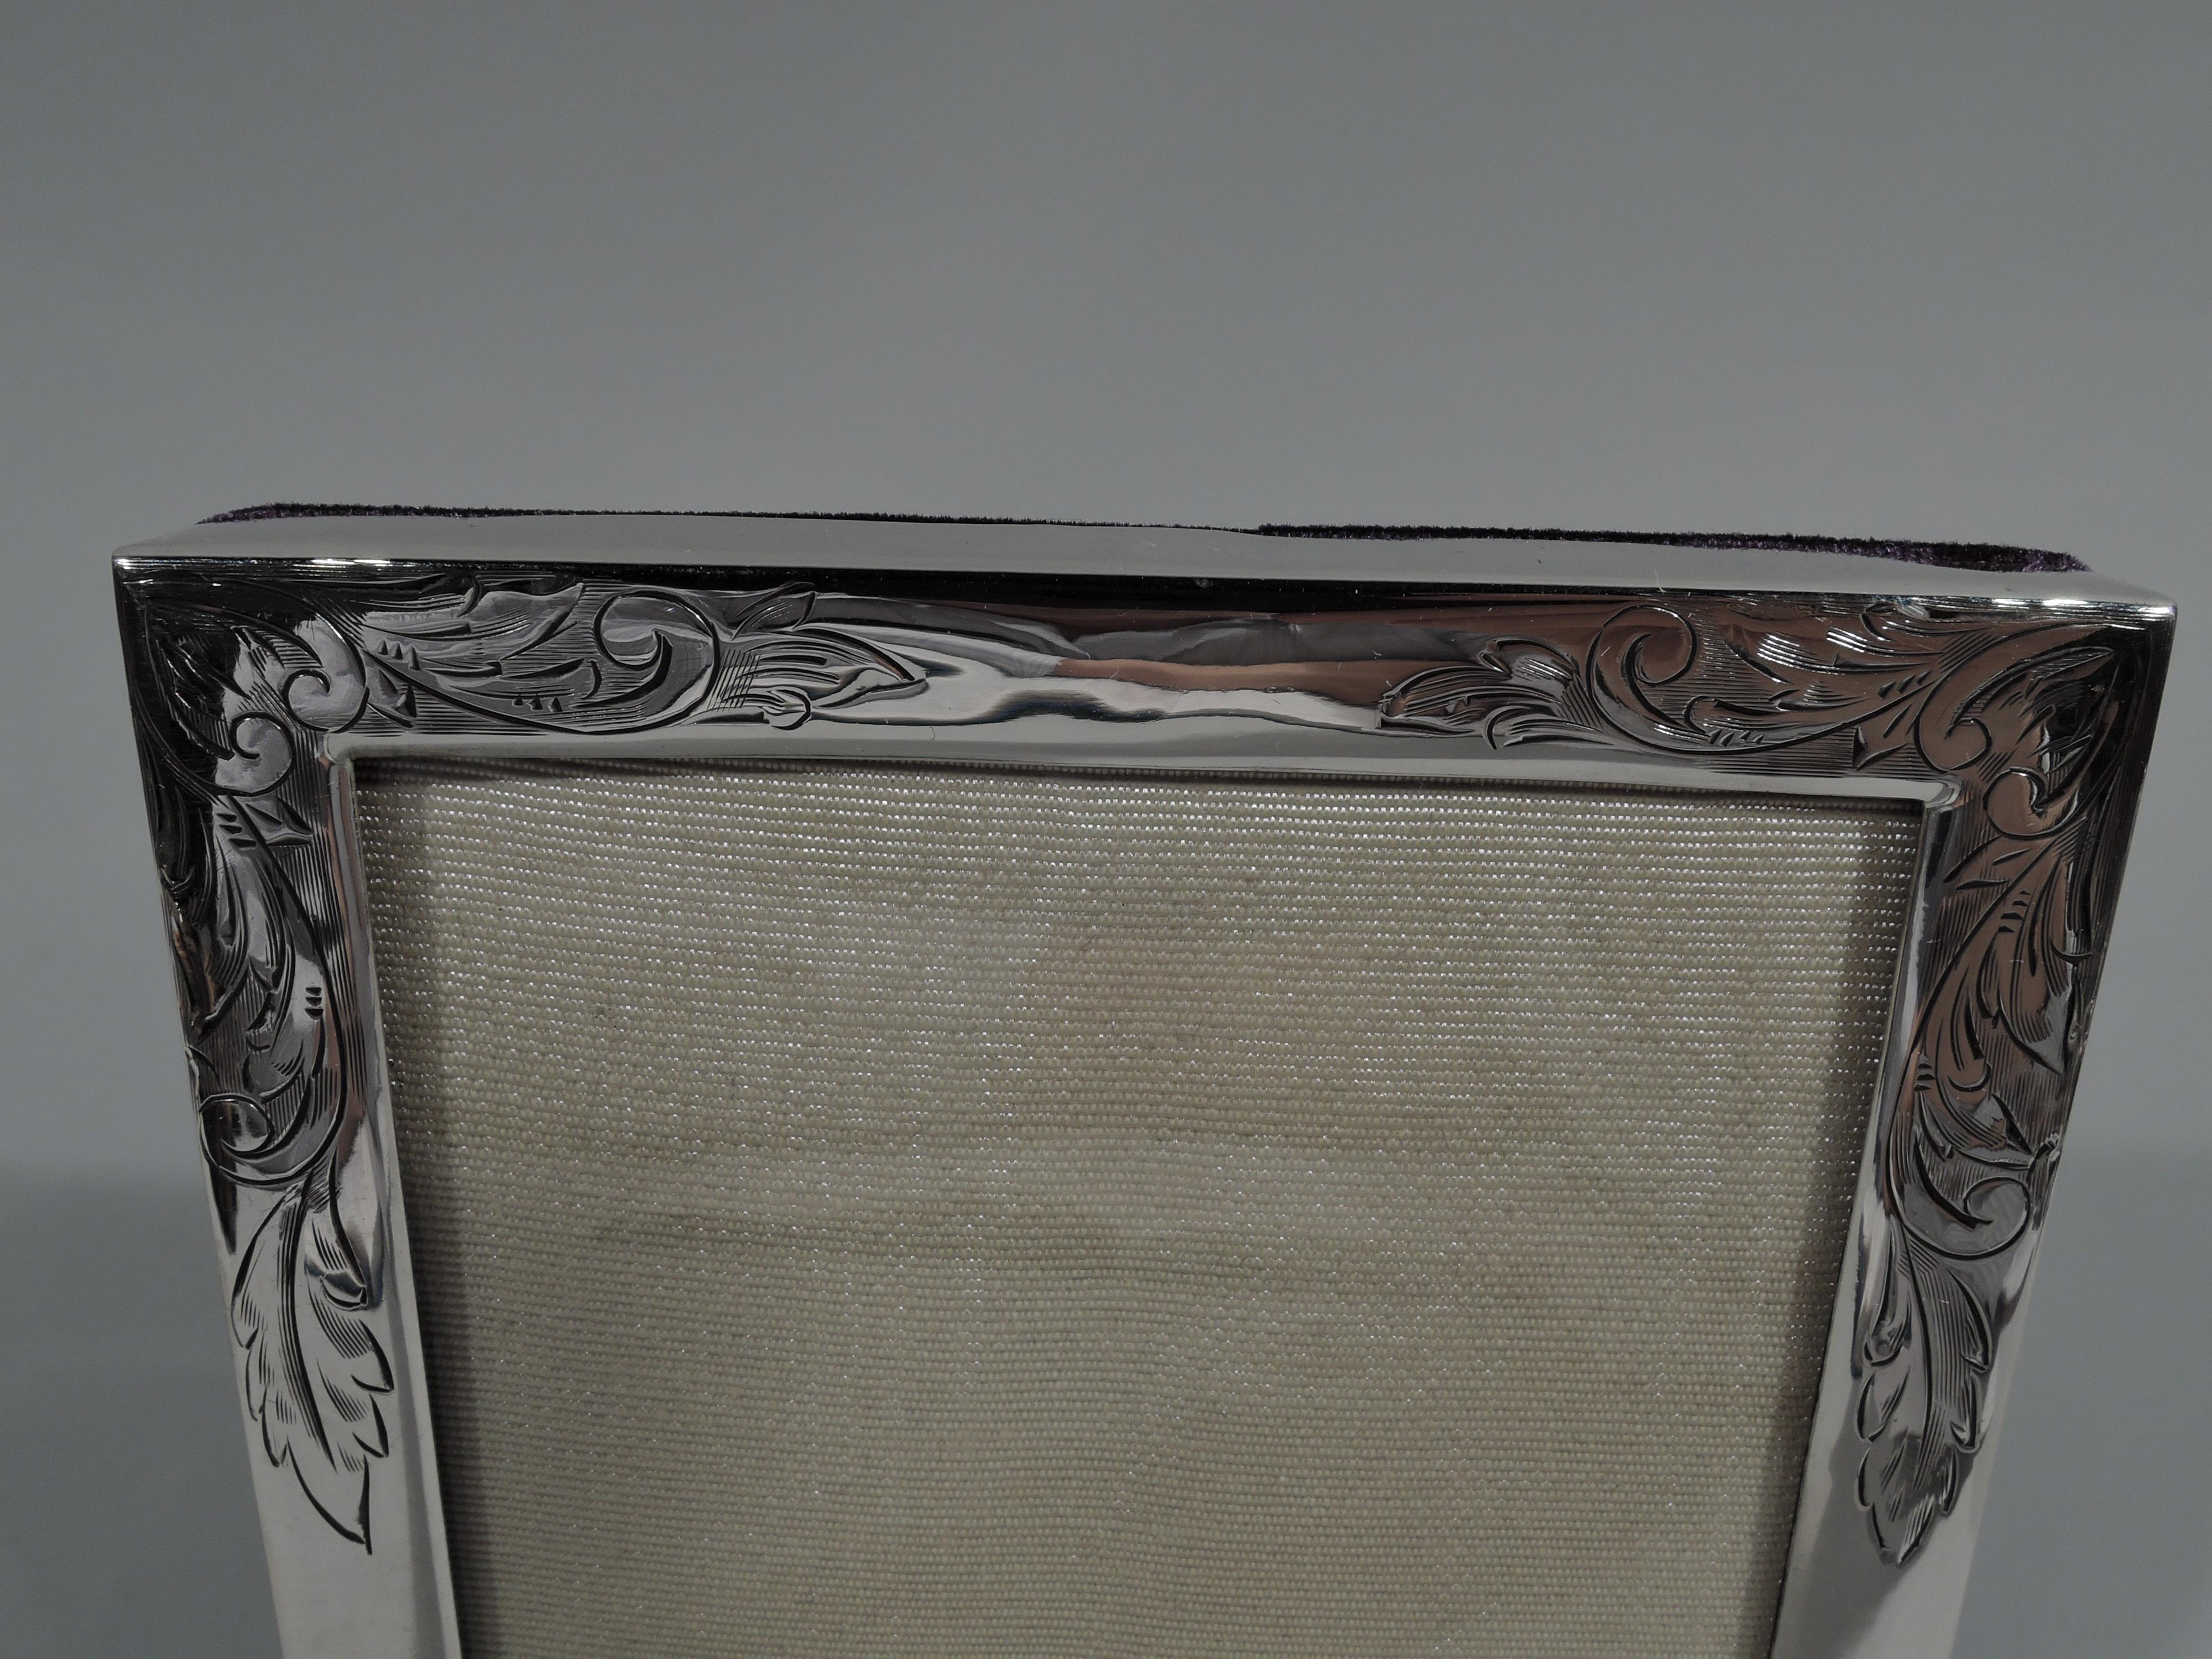 Pretty American sterling silver picture frame. Rectangular window and surround engraved with loose and flowing leaf scrolls. With glass, silk lining, and velvet back and hinged support for portrait (vertical) display. Fully marked including no. 23